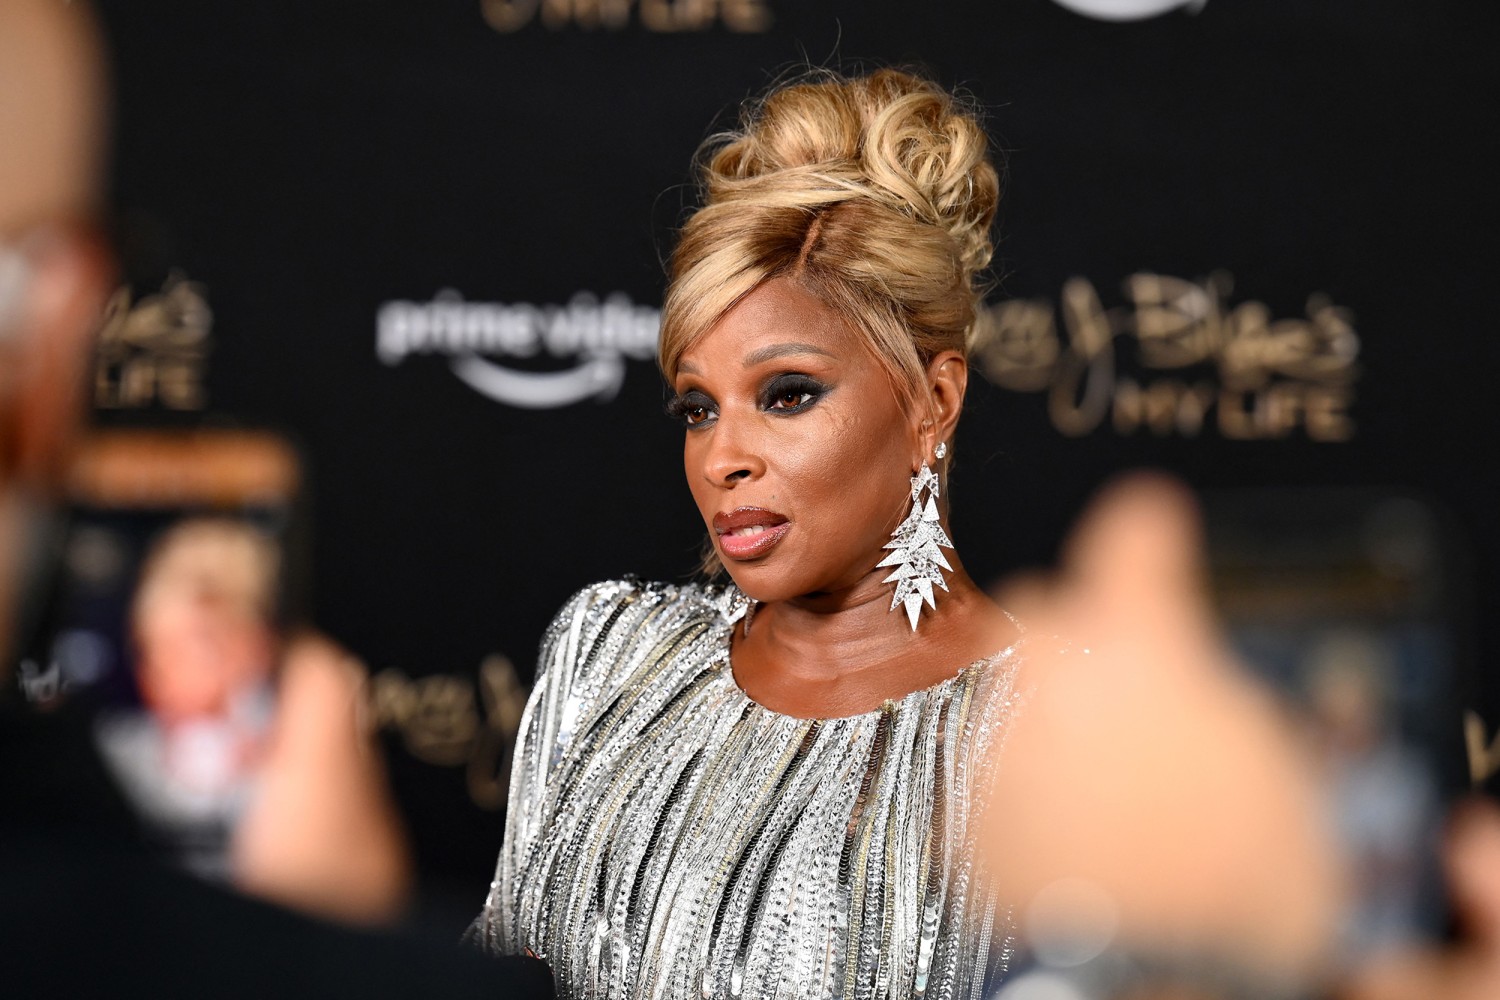 PICS: Mary J. Blige on set of 'Power Book II: Ghost' in NYC